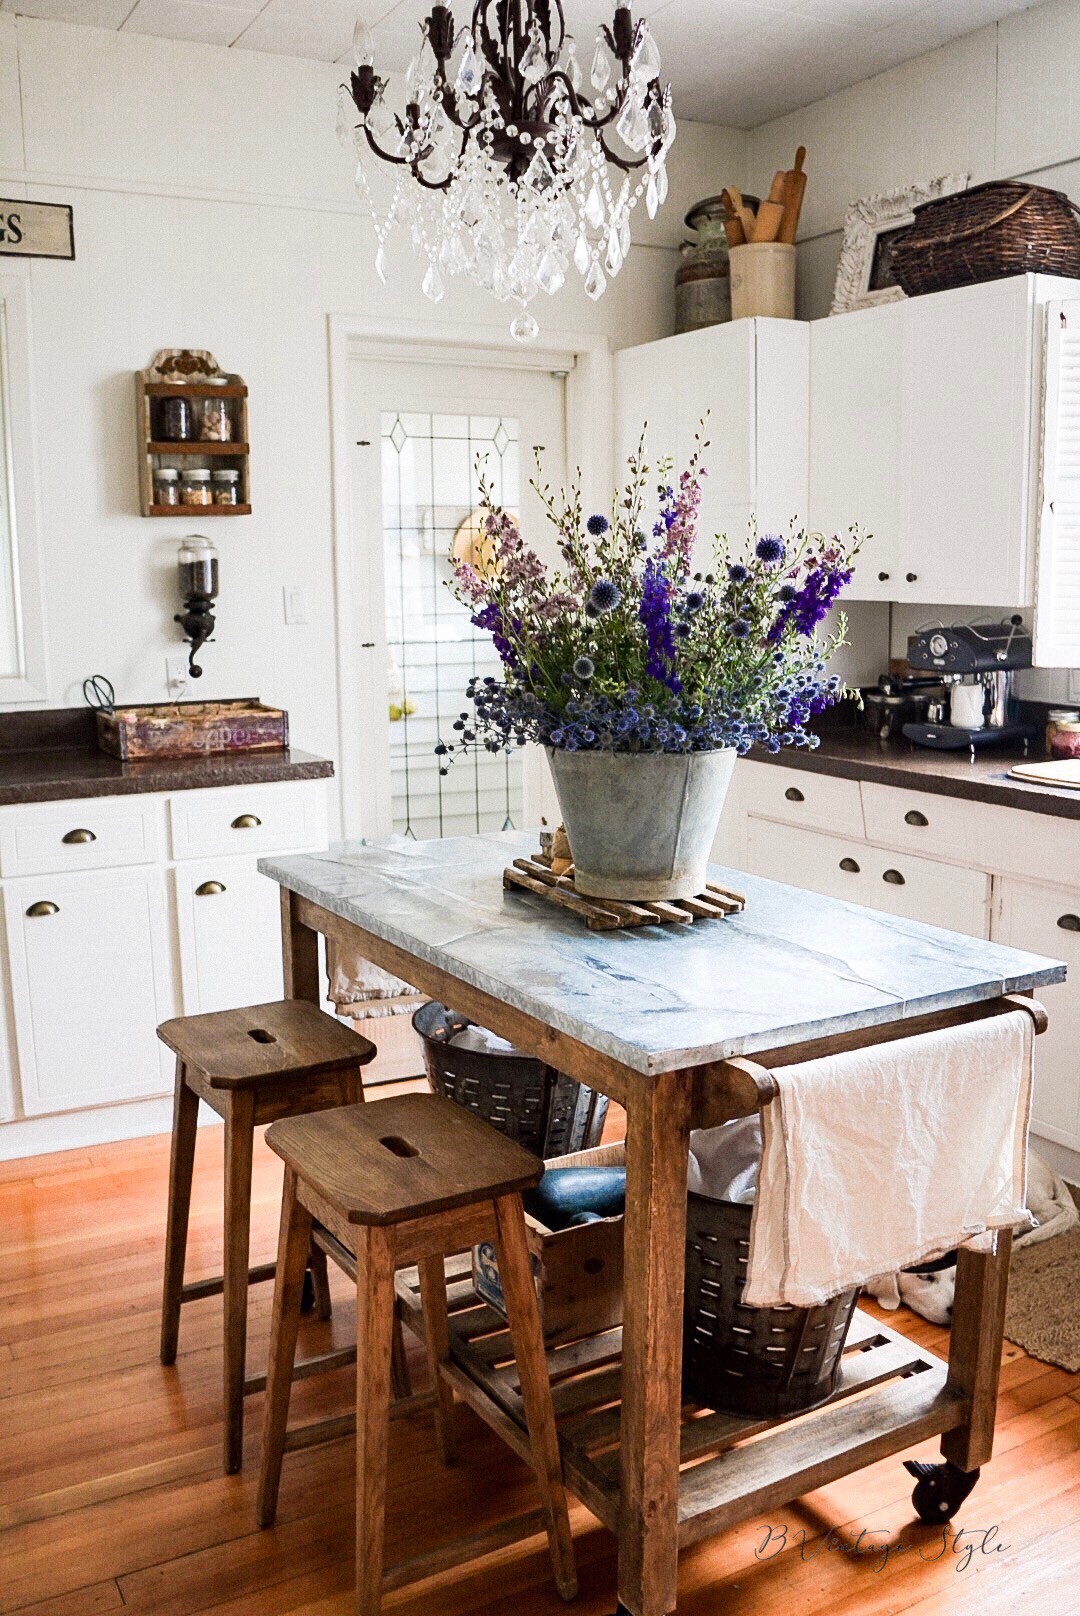 Love this farmhouse kitchen with white cabinets and wood and stainless steel island kellyelko.com #farmhousekitchen #farmhousedecor #farmhouse #kitchen #kitchenisland